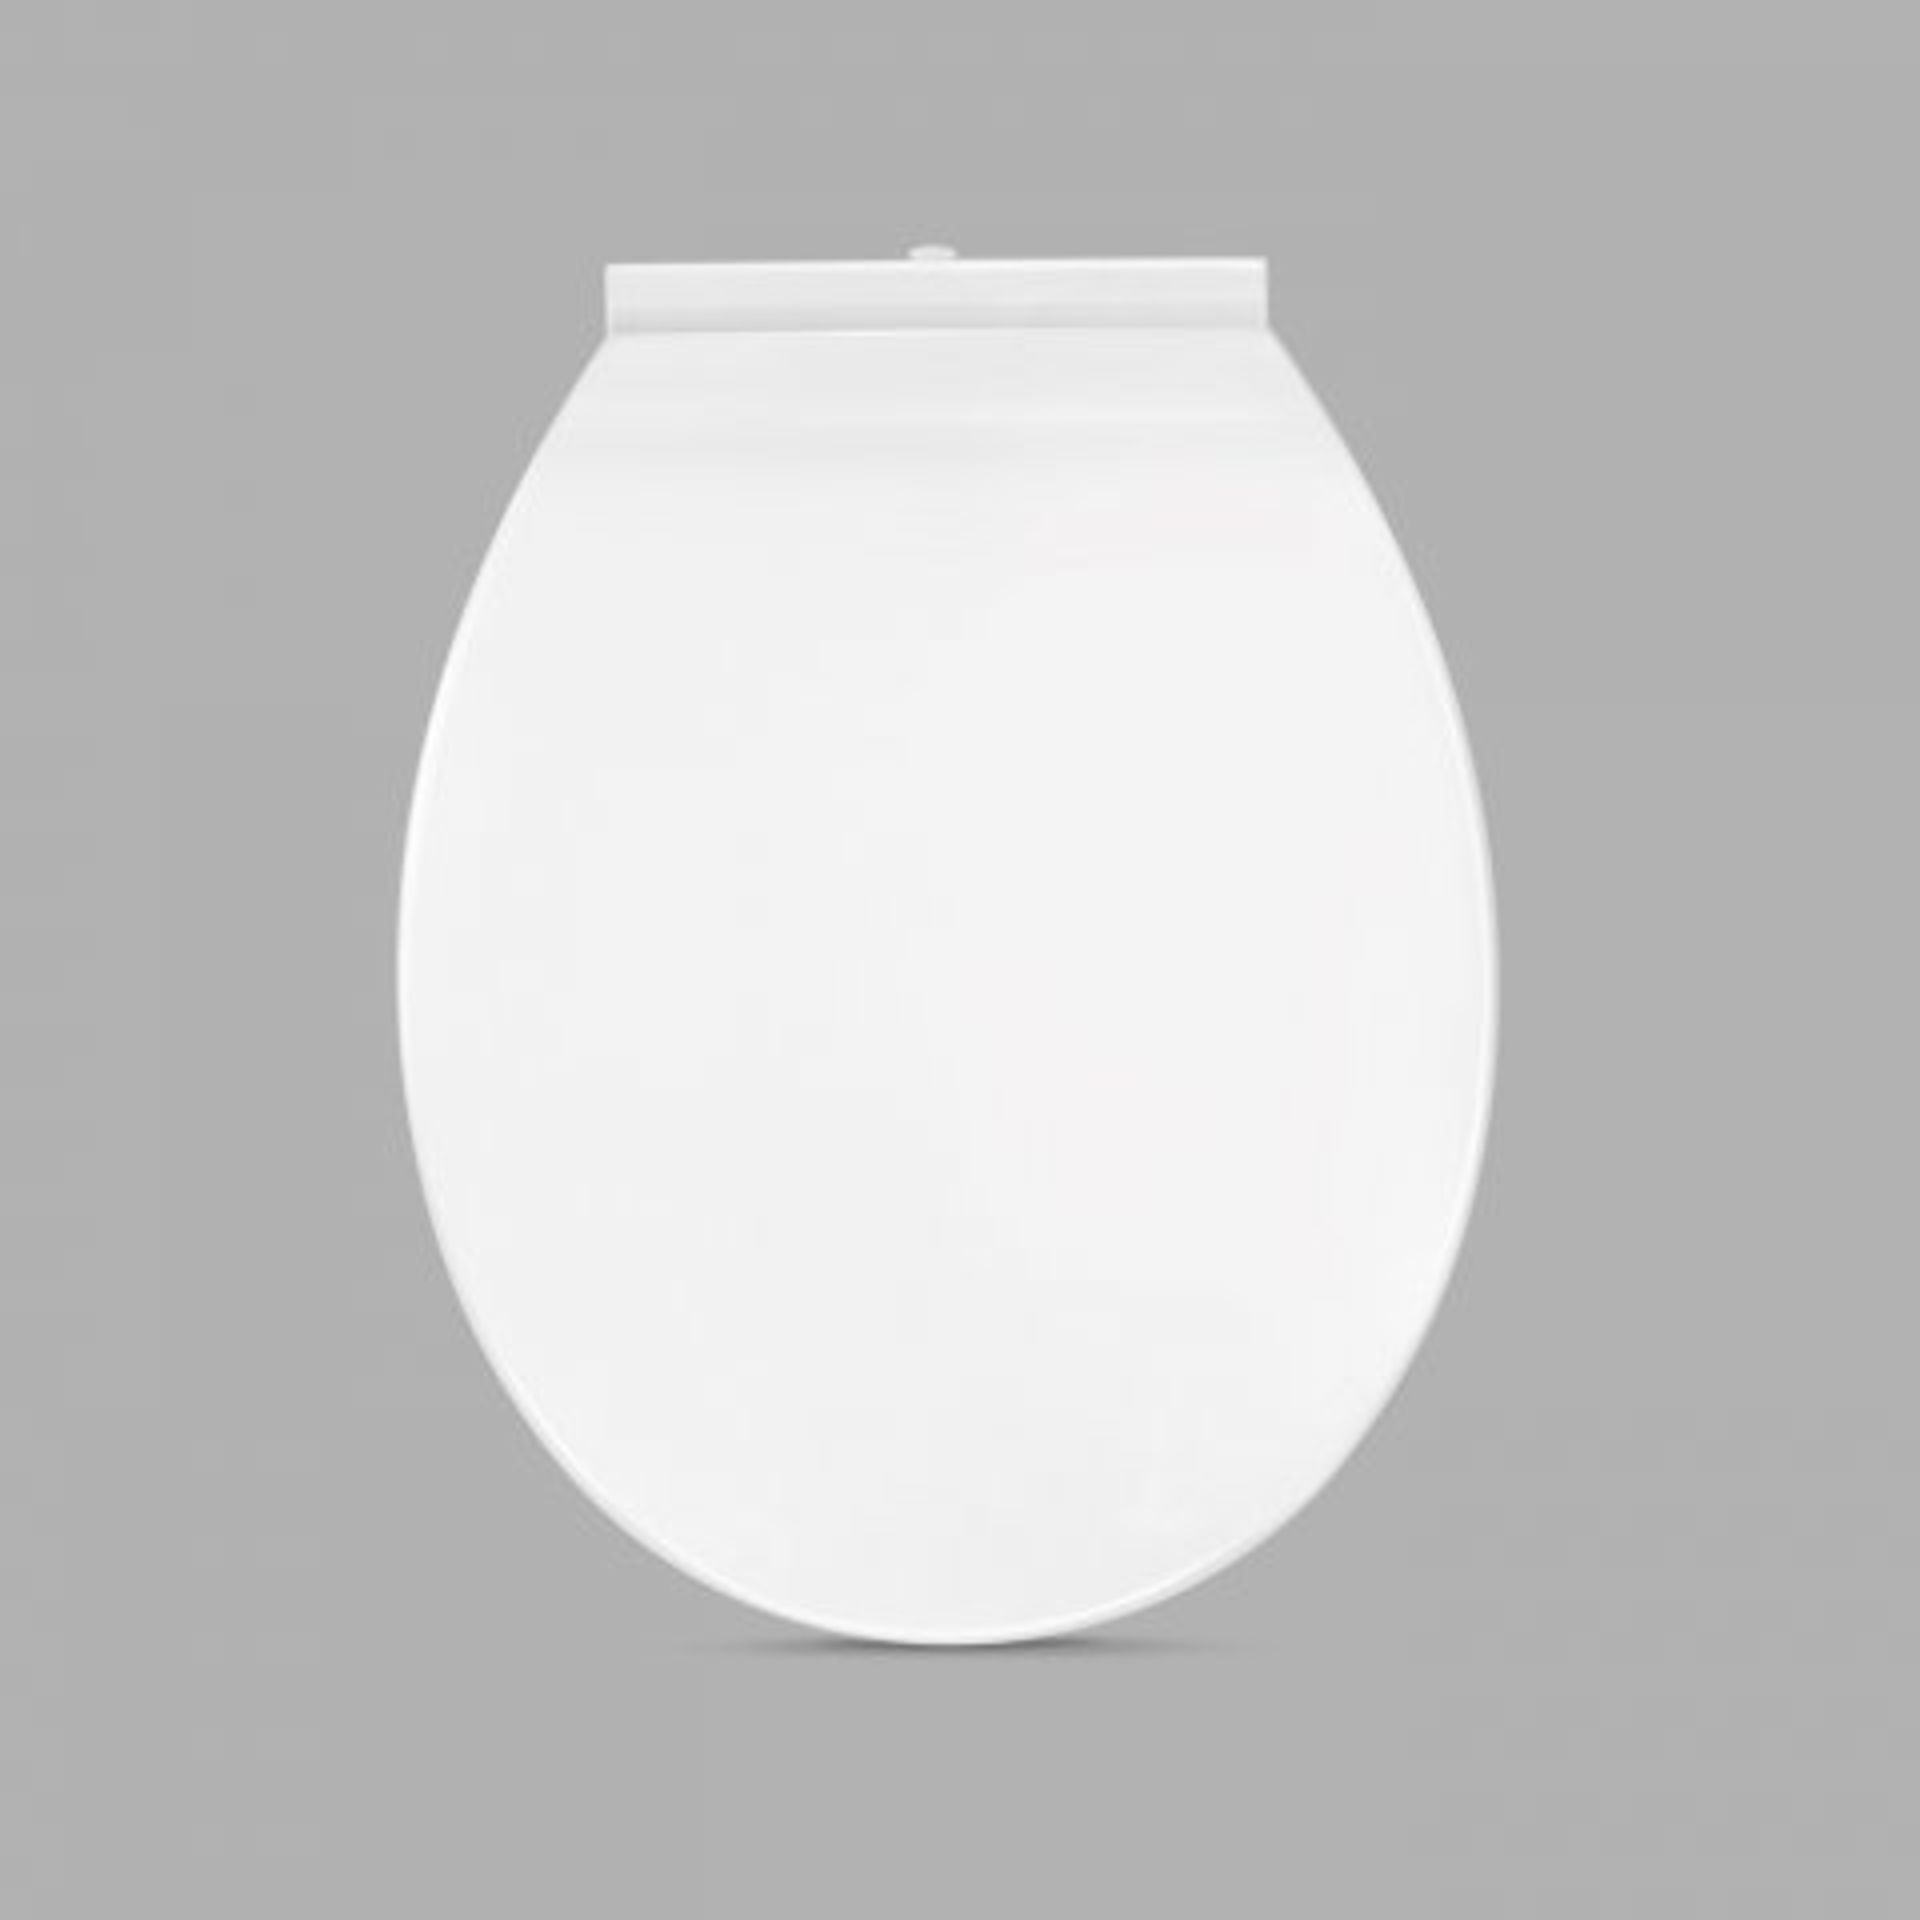 (AA181) Crosby Toilet Seat - Soft Closing Our luxury Crosby Soft Close Toilet Seat is provided